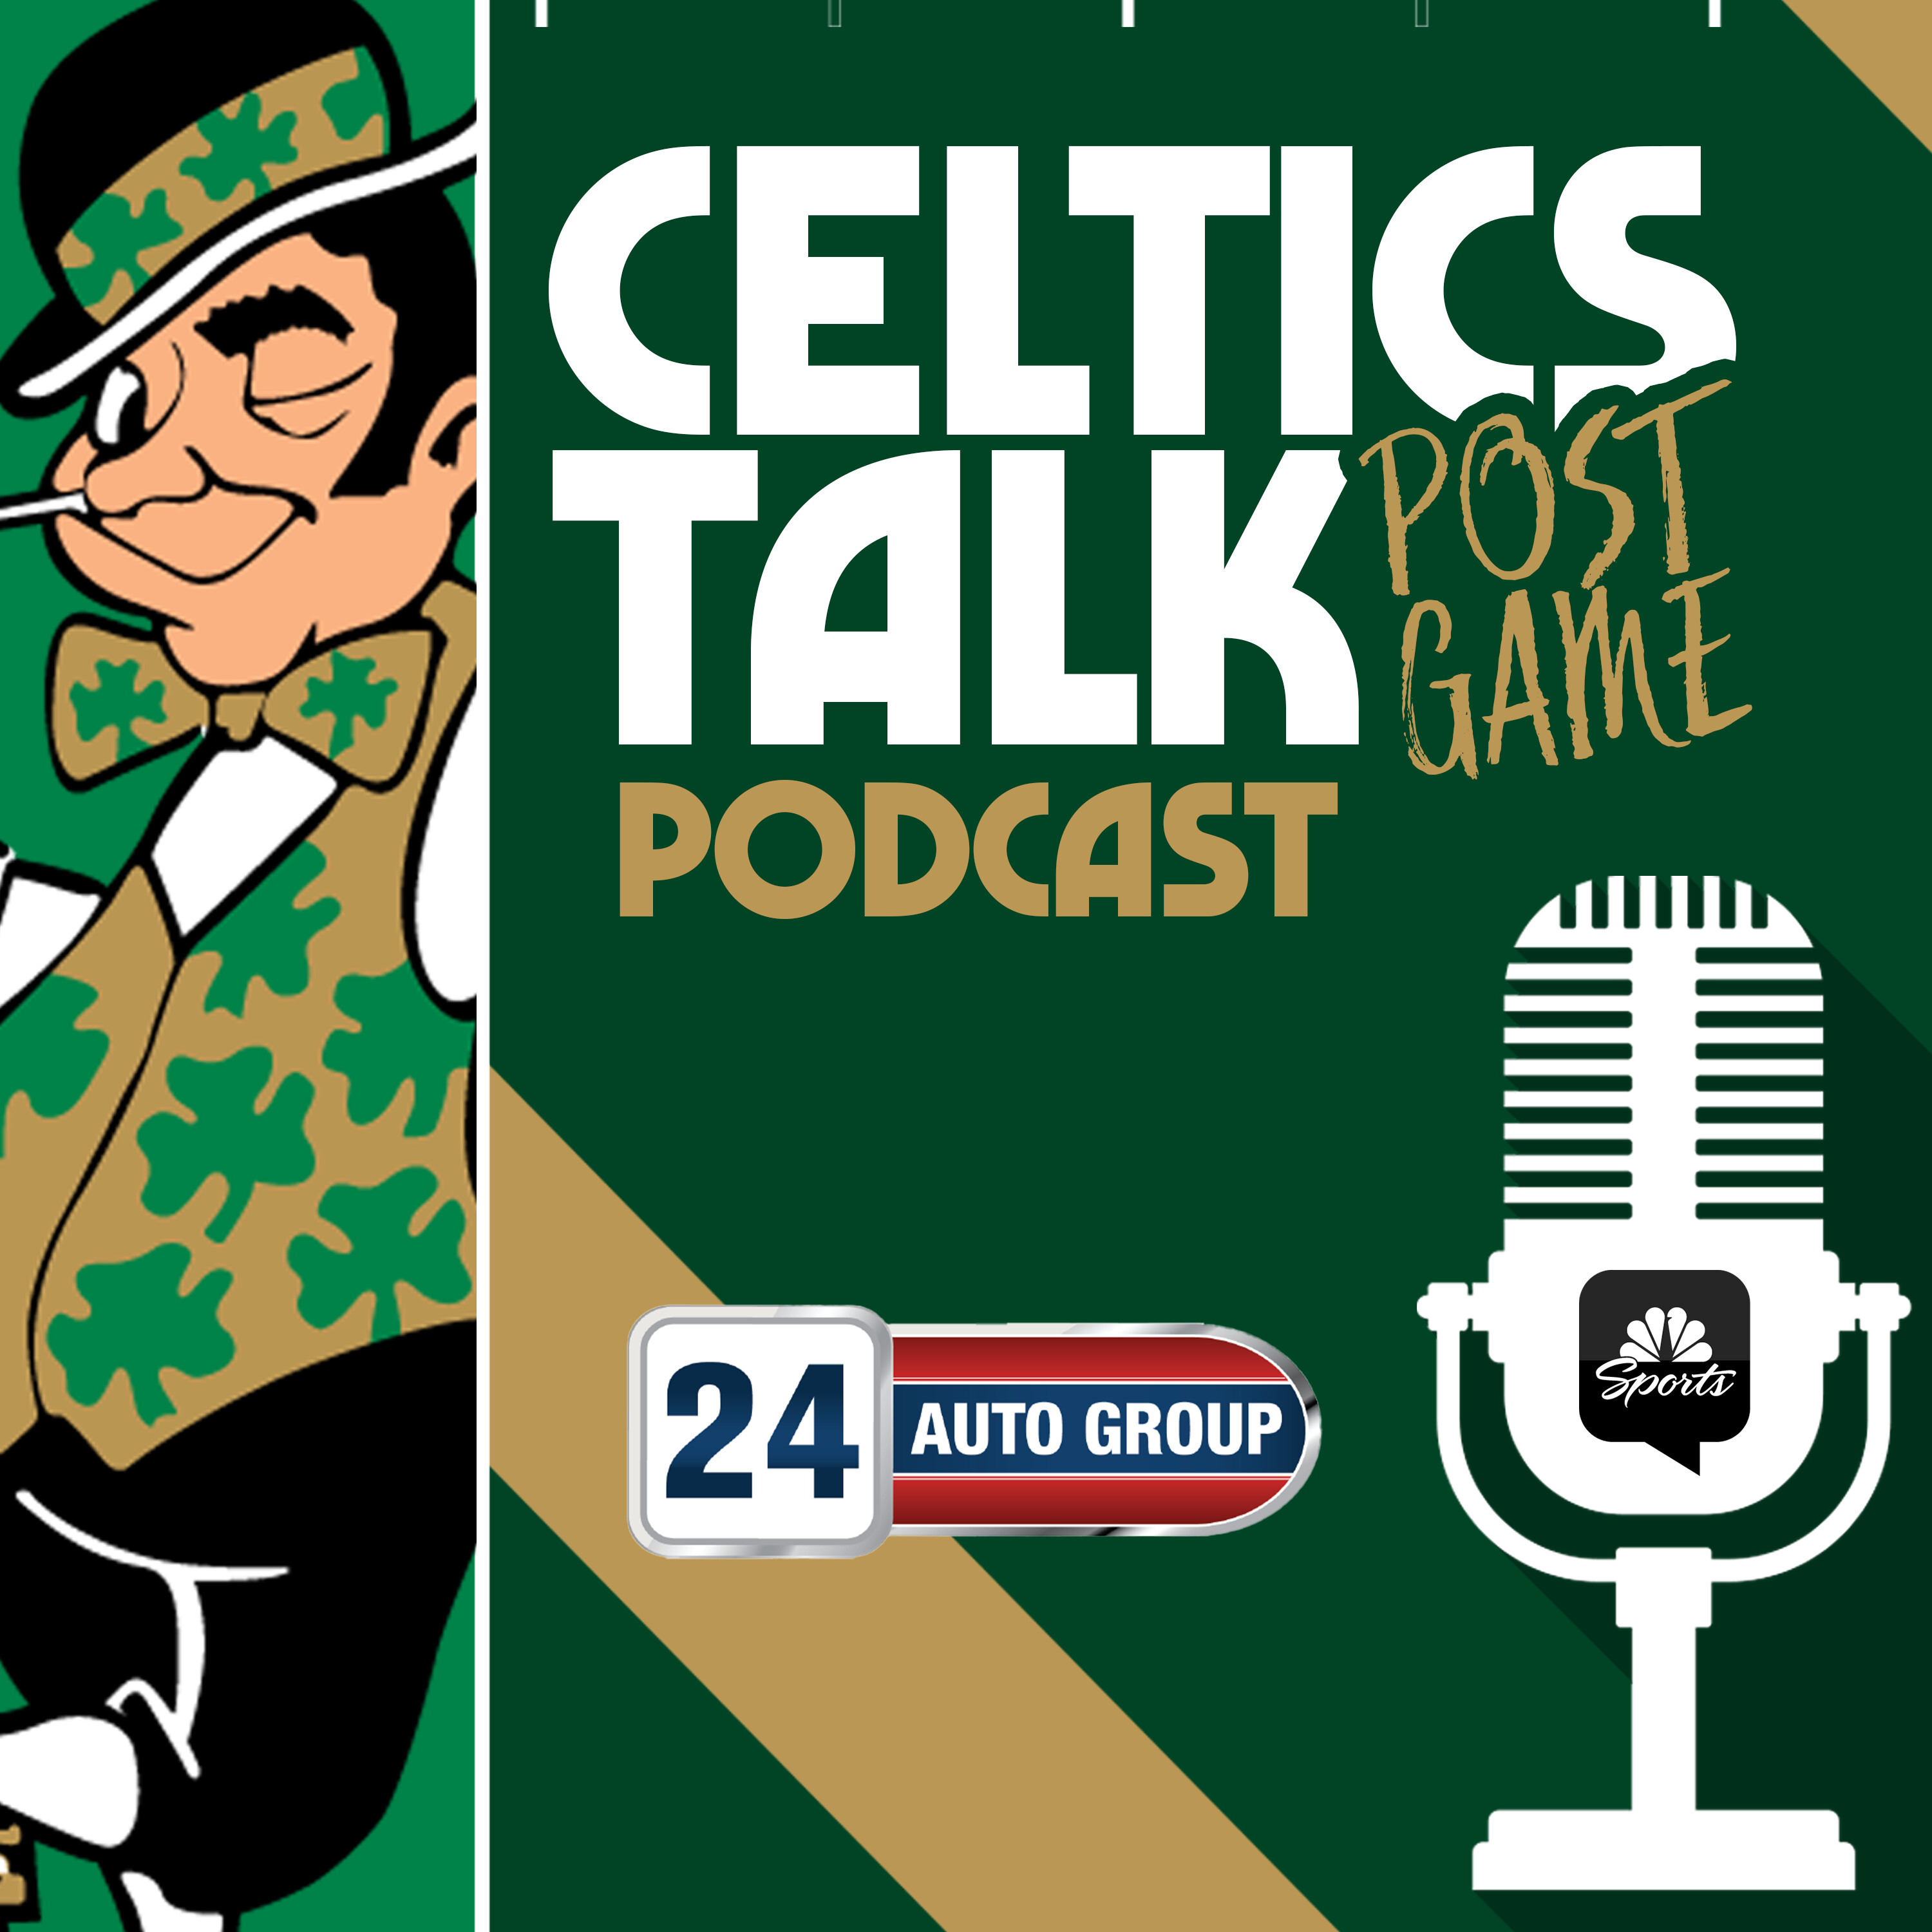 POSTGAME POD: ’Focused’ Celtics ’impose their will’ on Kings in bounce-back win